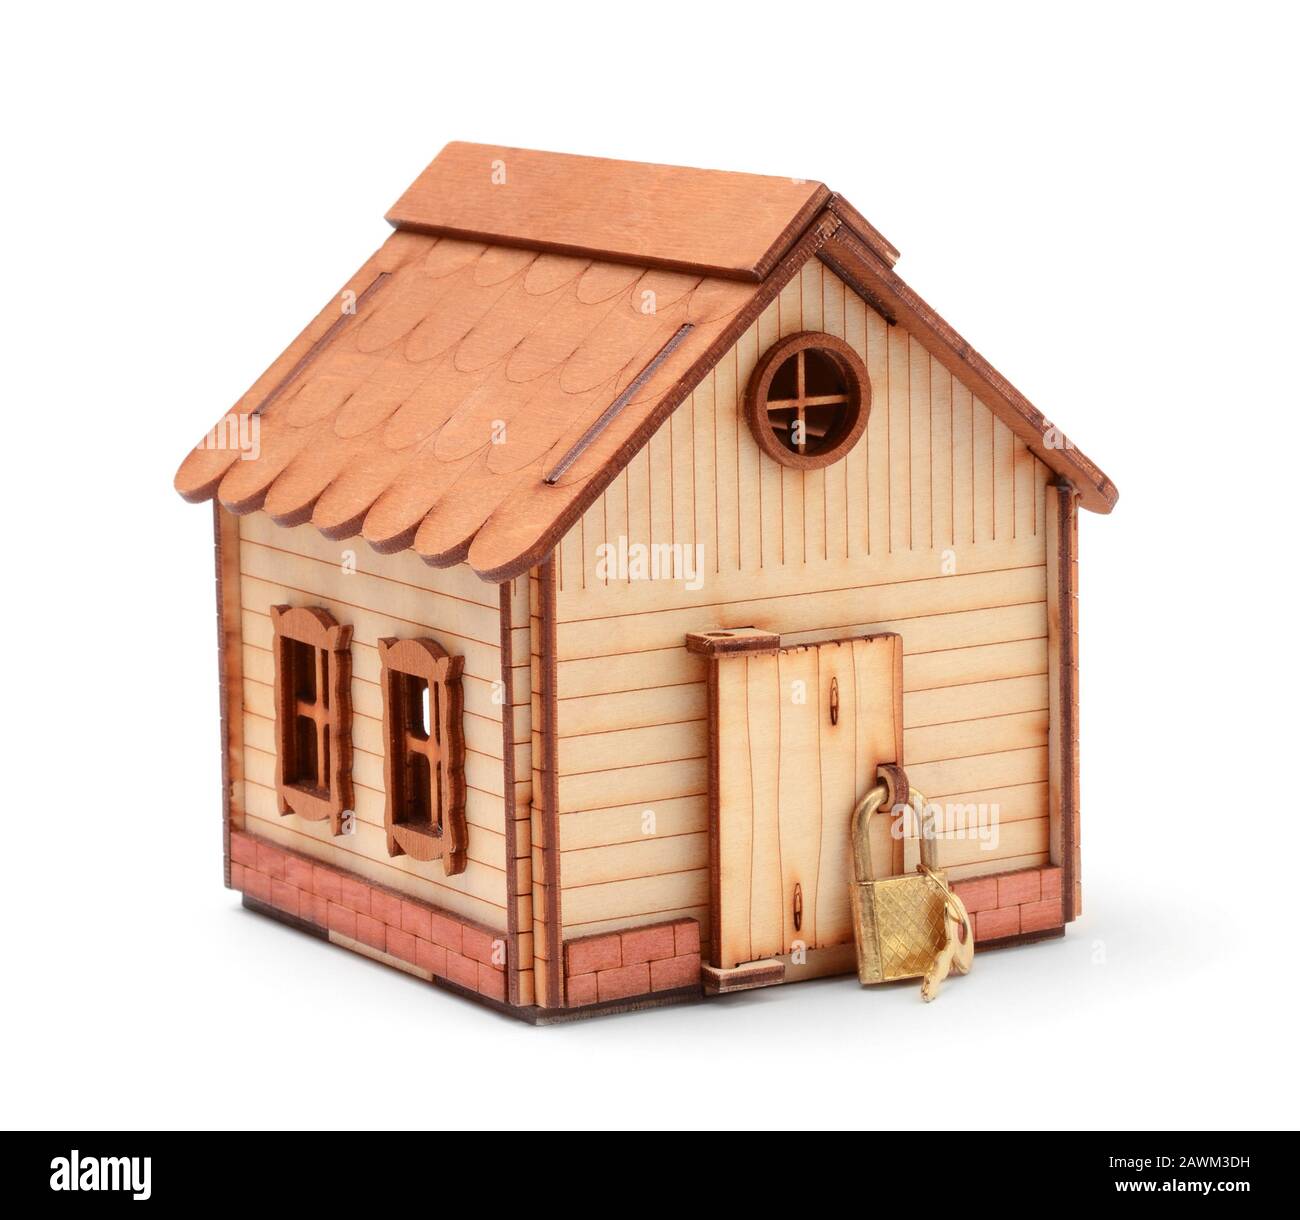 Toy wooden house isolated on white background Stock Photo